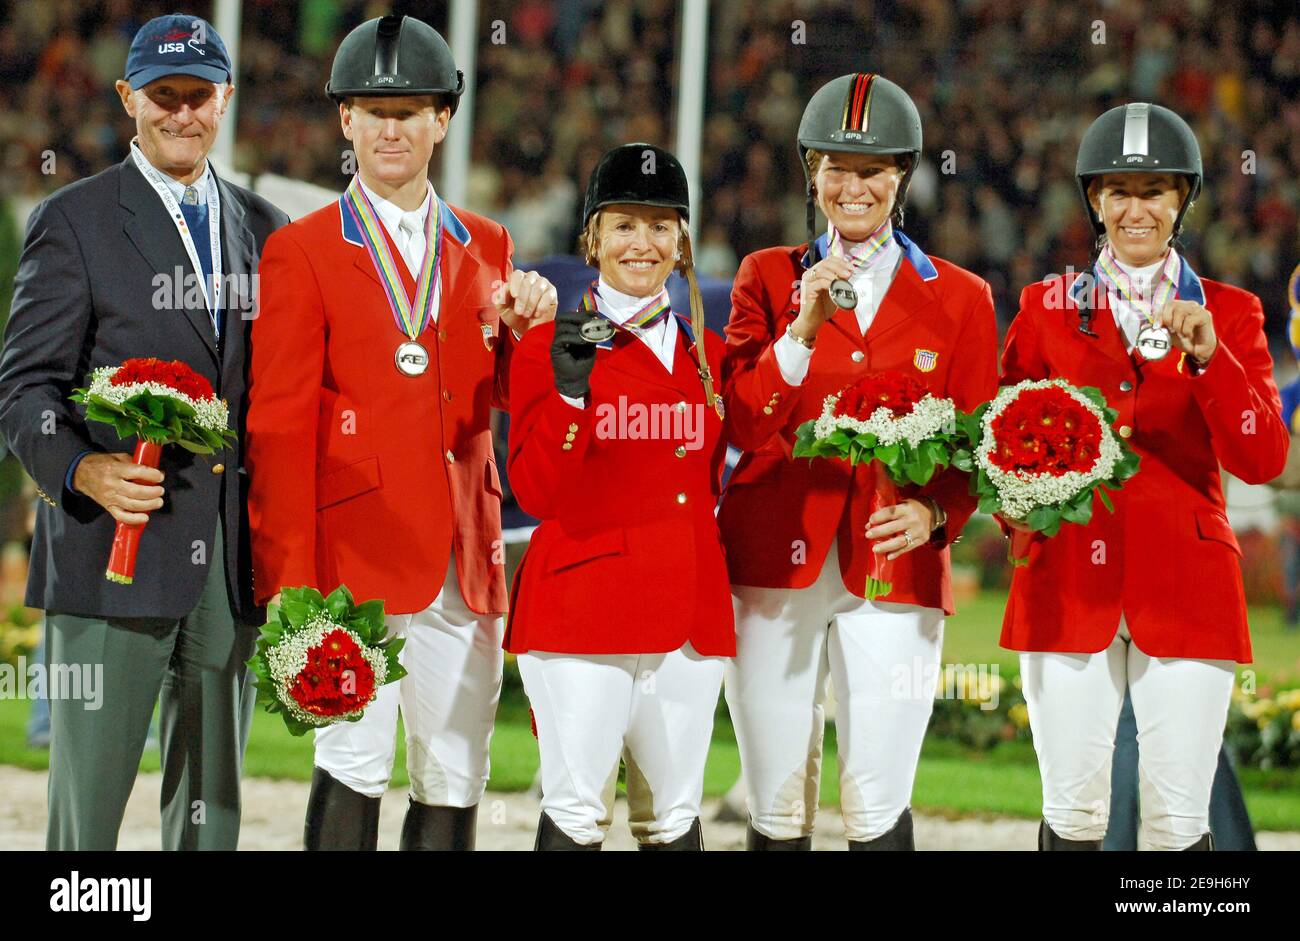 USA's team (L-R) Georges Morris (coach), McLain Ward, Margie Engle, Beezie Madden and Laura Kraut won the silver medal during the jumping team competition at the FEI World Equestrian Championships, in Aachen, Germany, on August 31, 2006. Photo by Edwin Cook/Cameleon/ABACAPRESS.COM Stock Photo